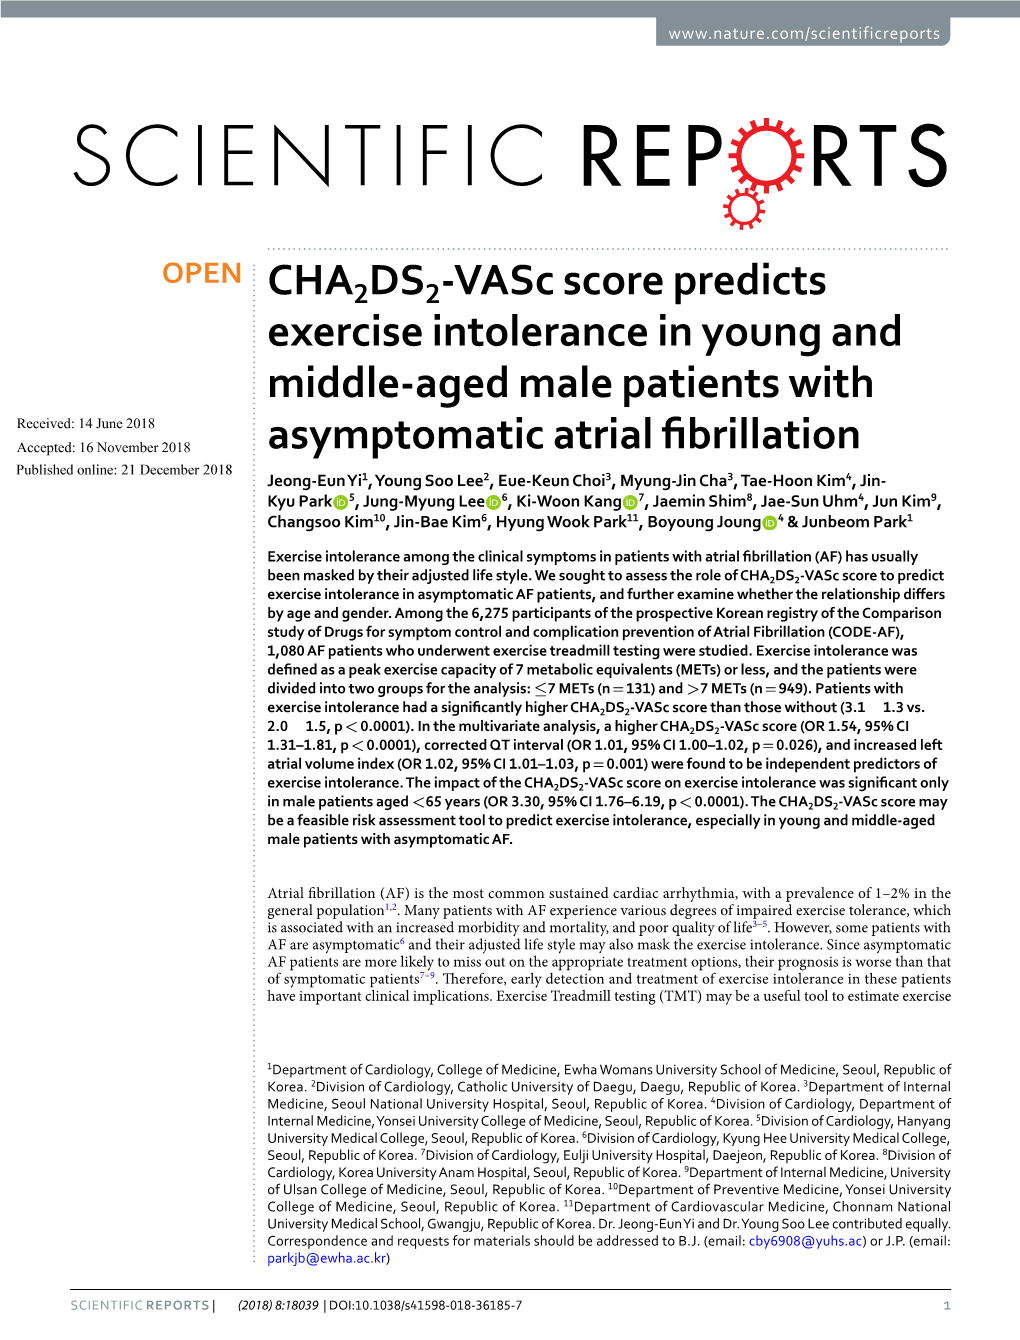 CHA2DS2-Vasc Score Predicts Exercise Intolerance in Young And